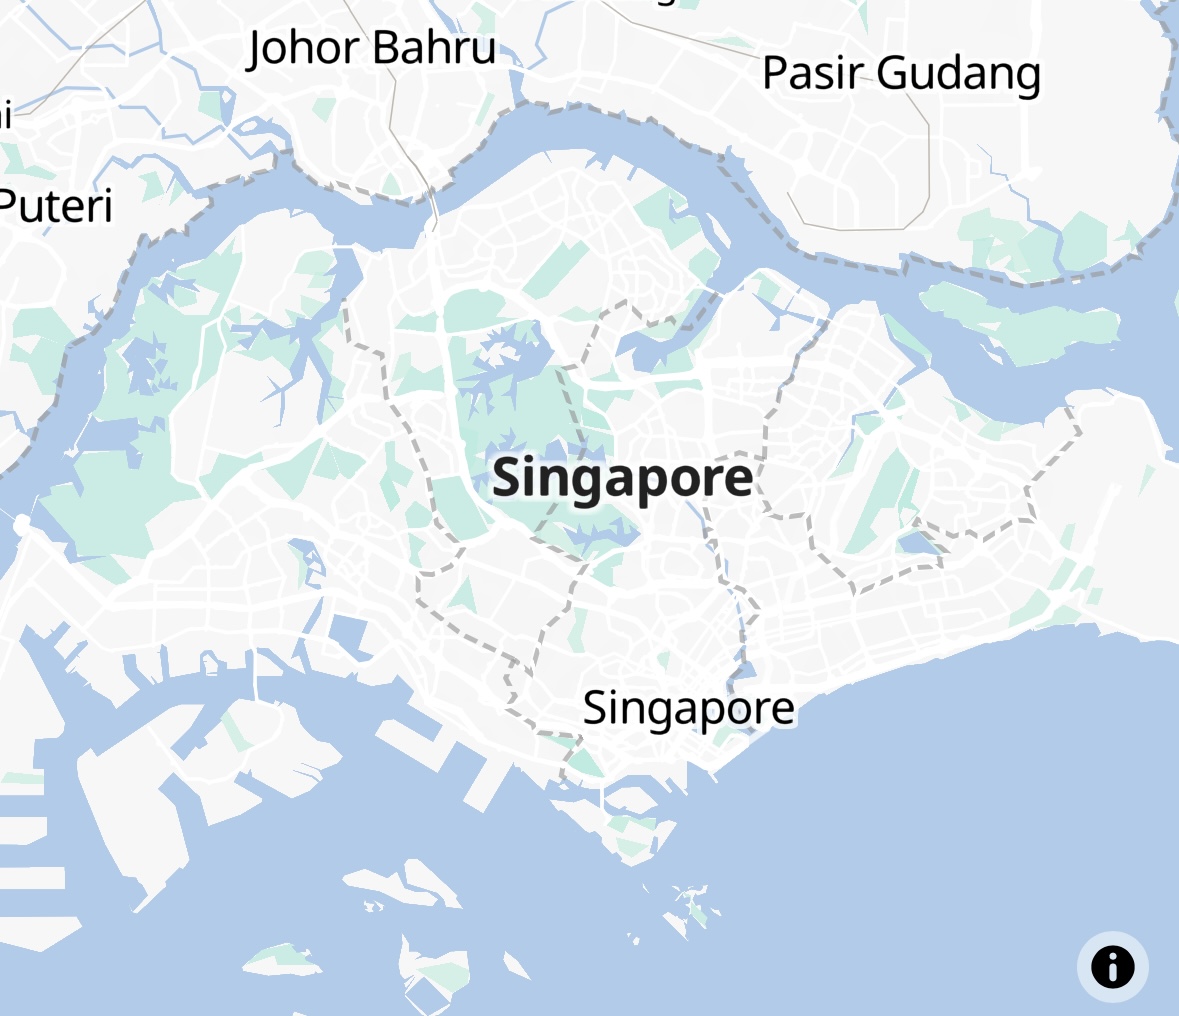 Nearby Singapore deals with map